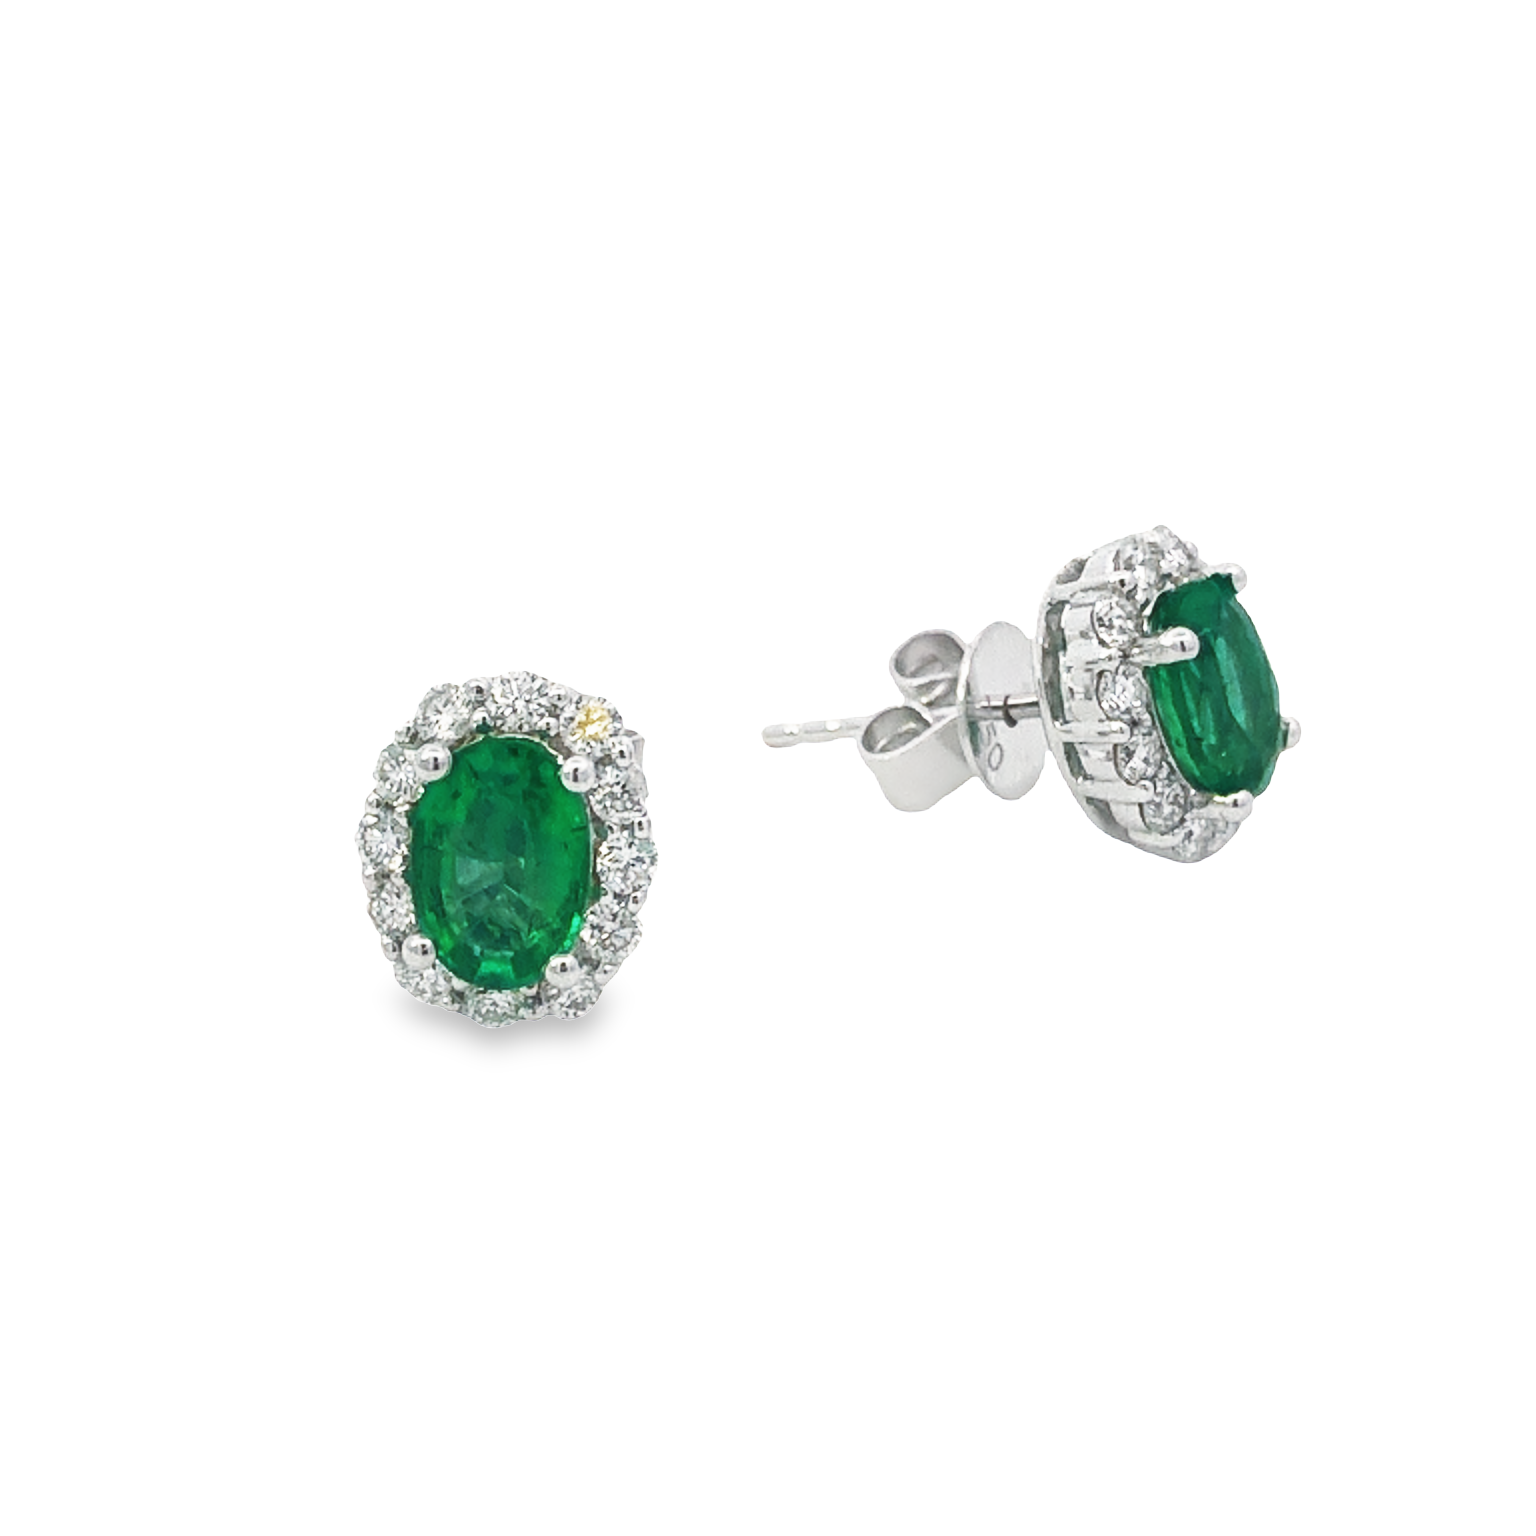 18K White Gold Emerald and Diamond Halo Earrings with 2 Oval Emeralds